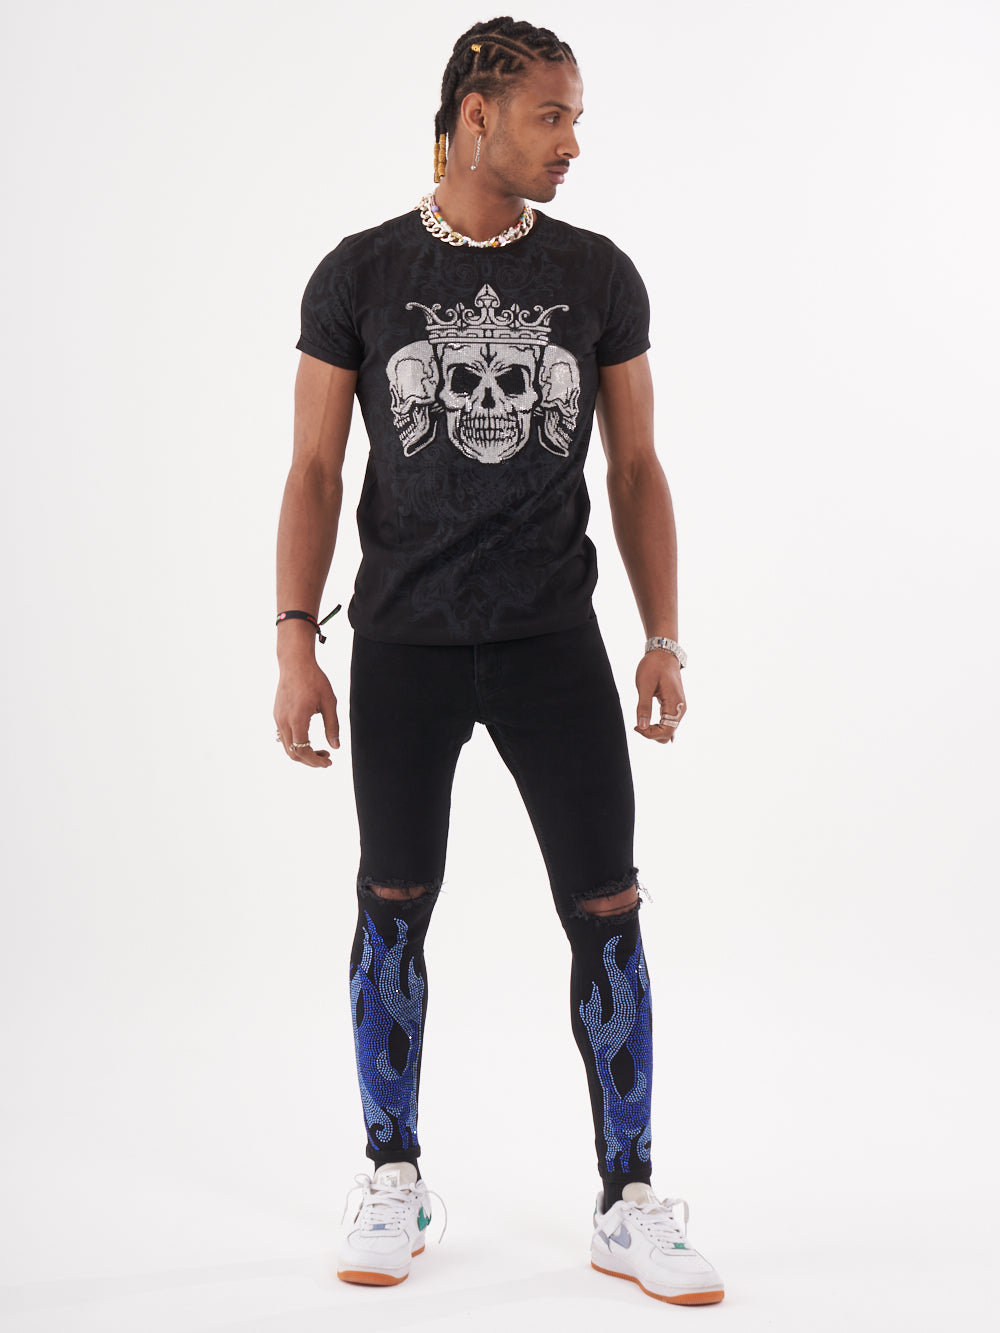 A man wearing a TRINITY T-Shirt in black with a skeleton print and blue jeans.